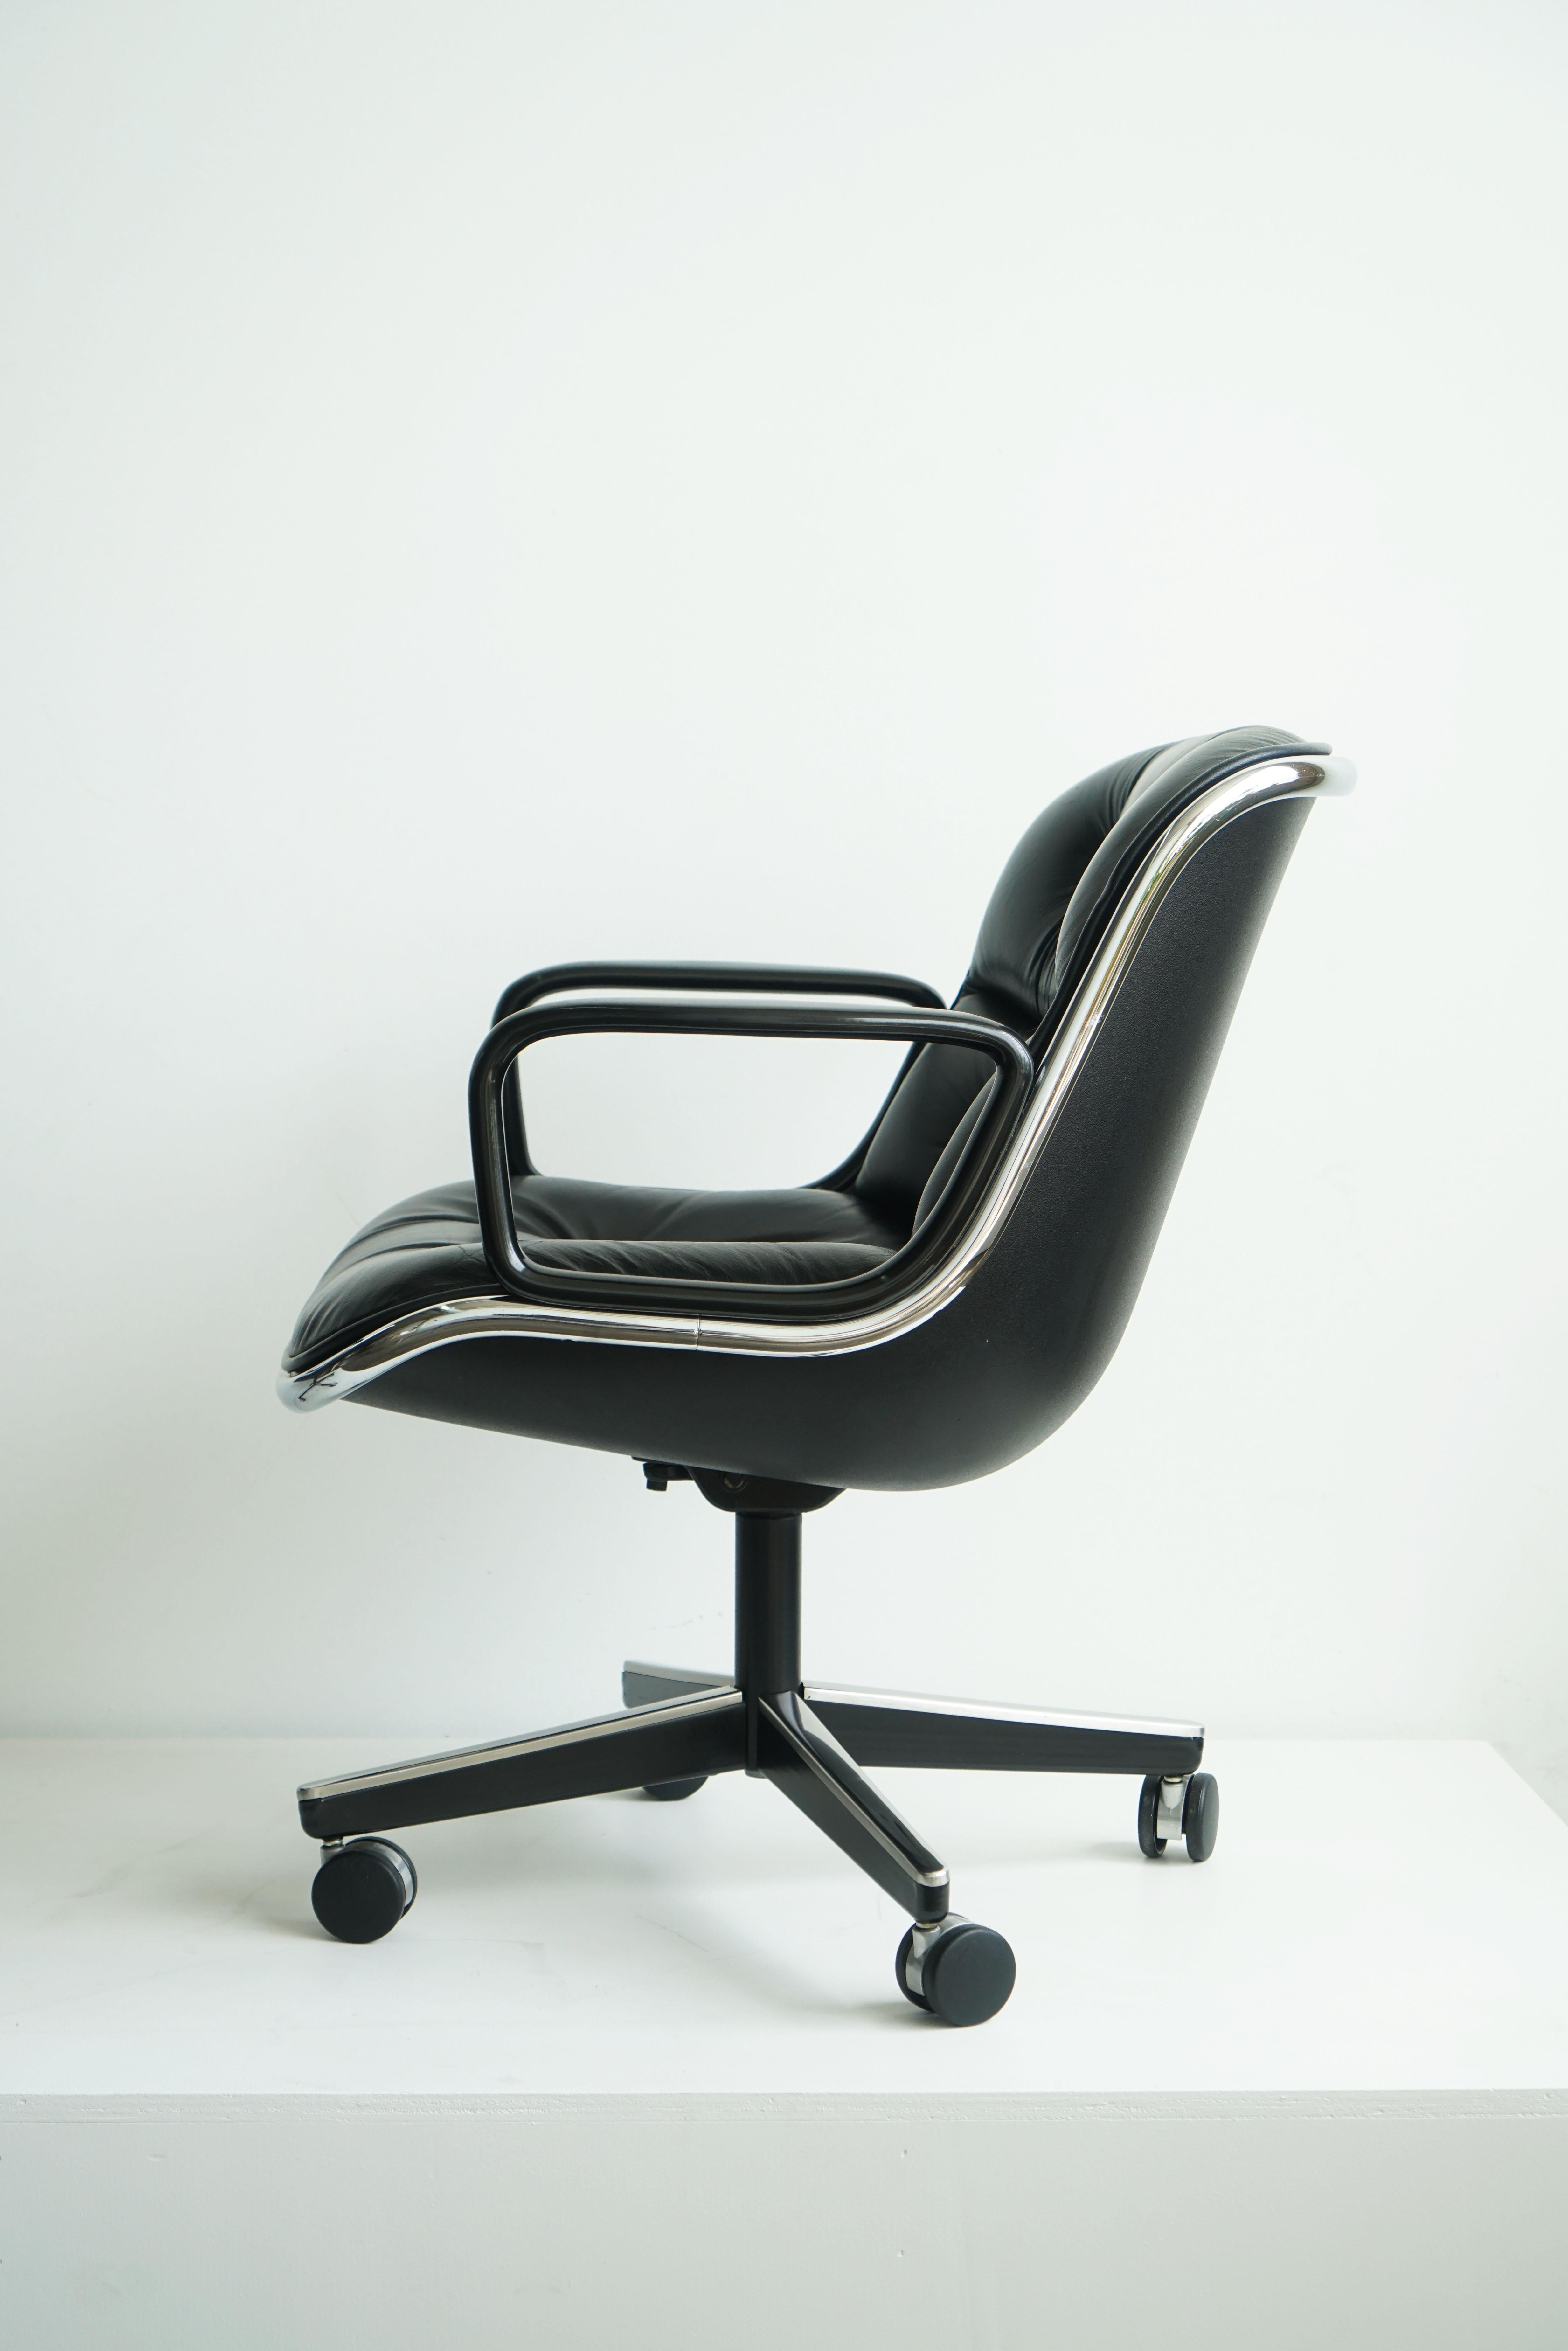 Charles Pollock Executive chairs for Knoll,
in Black leather. 
Labels attached to underside.

Manufacturer date : 1984

One available.

Condition:
Overall in very good condition. A few cracks in the leather that aren't too noticeable , and a few